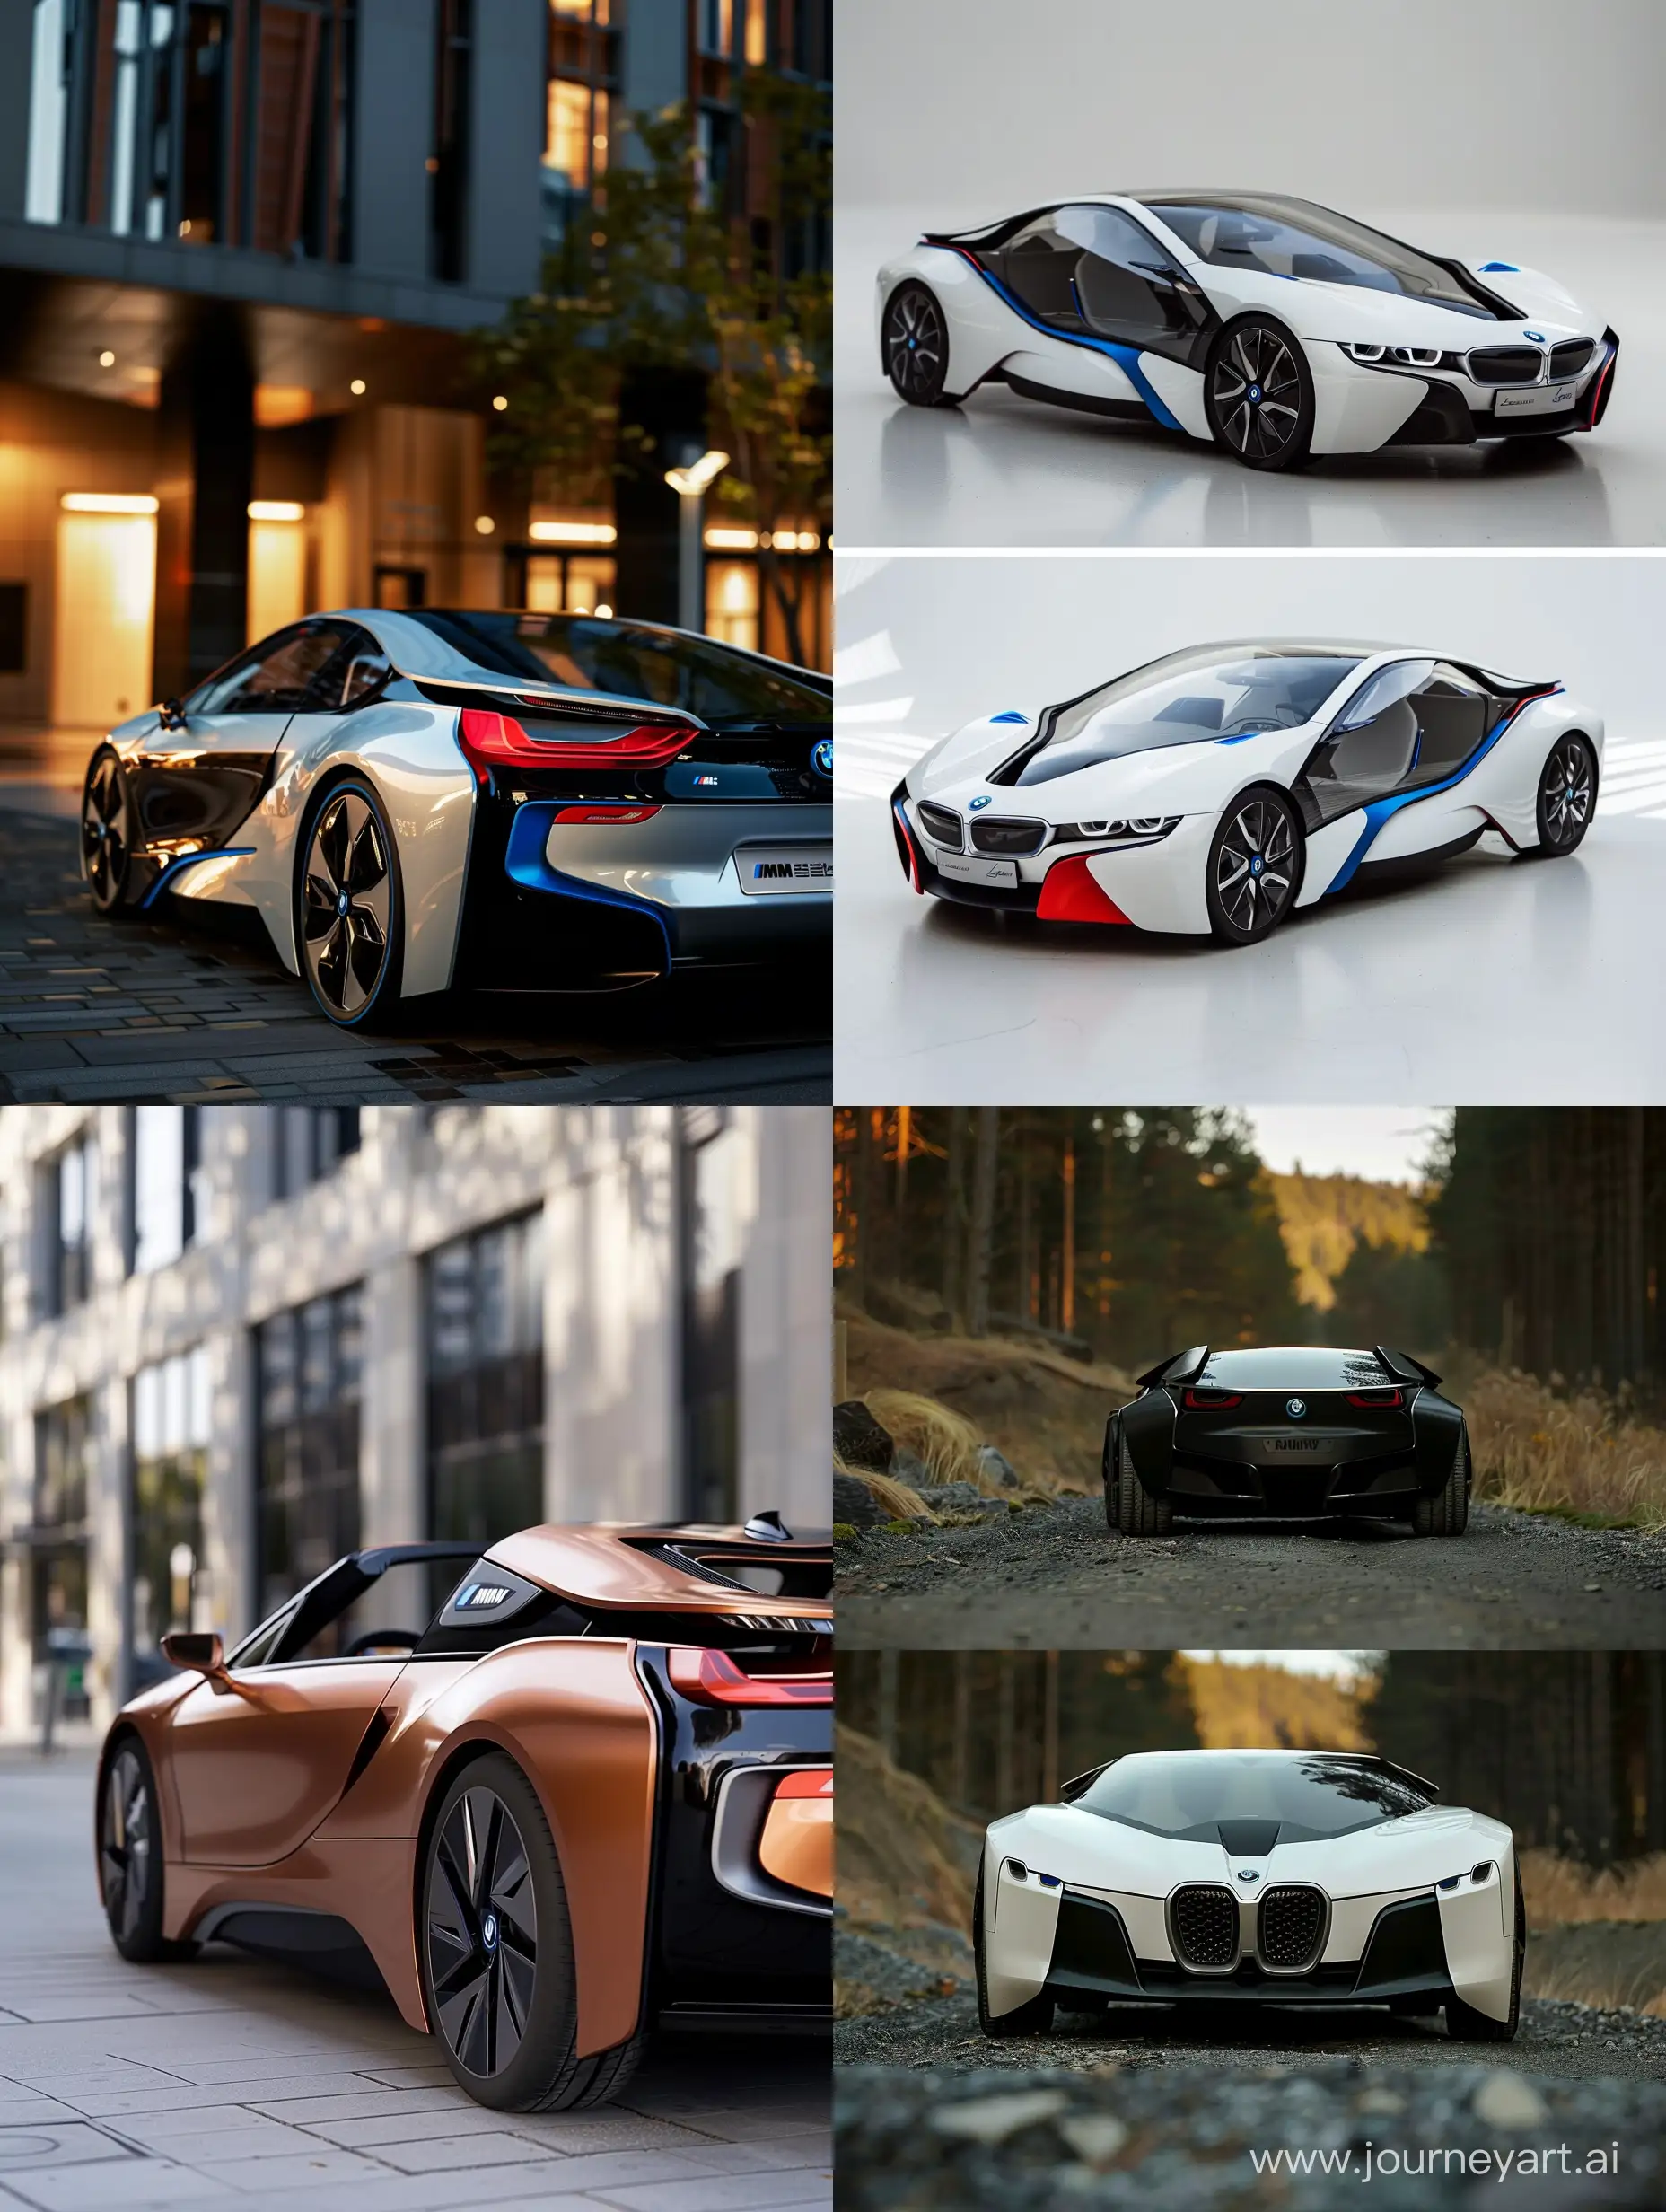 What will BMW cars look like in 2050?